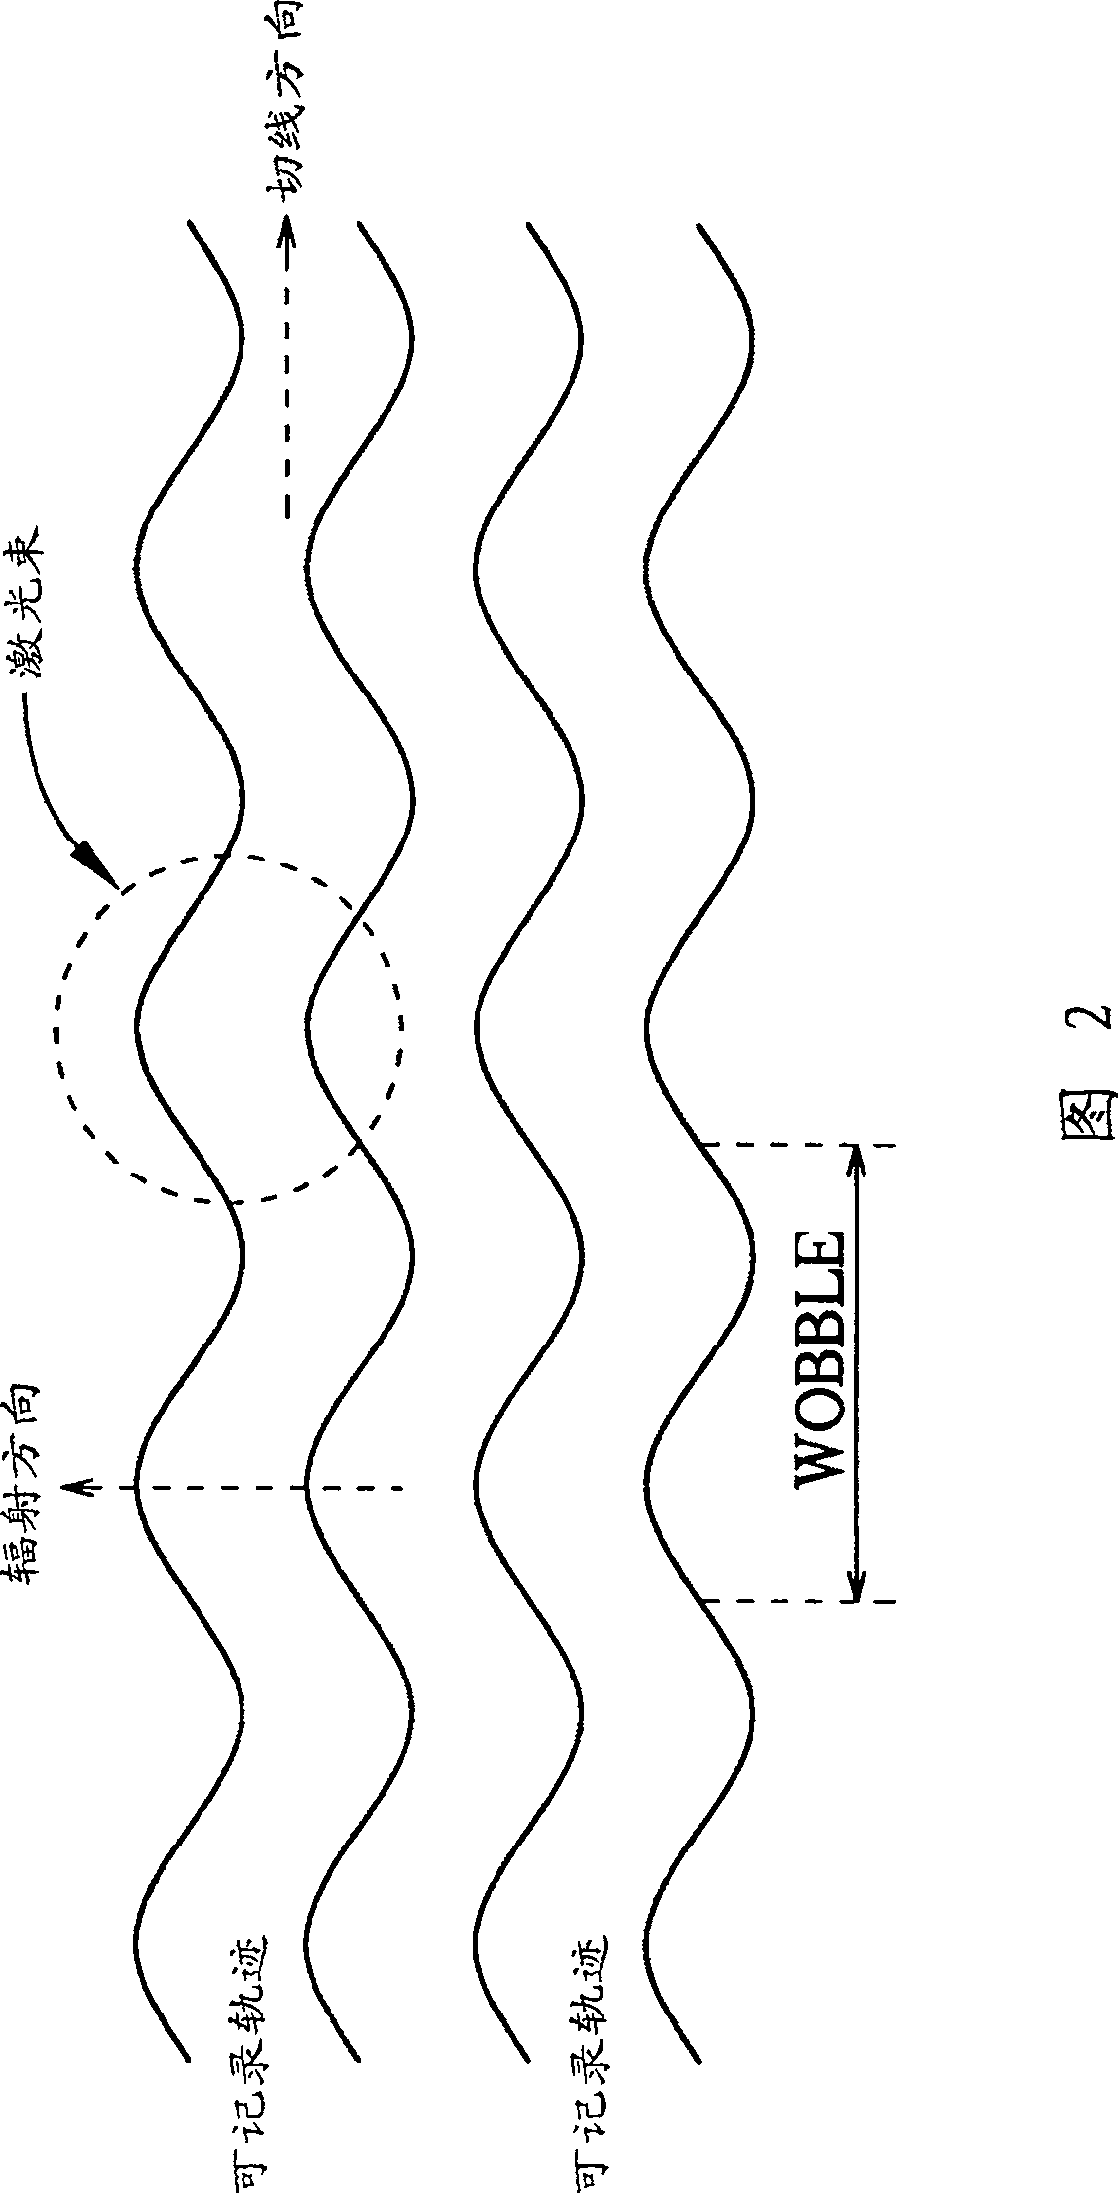 Phase locked loop for controlling recordable optical disk drive